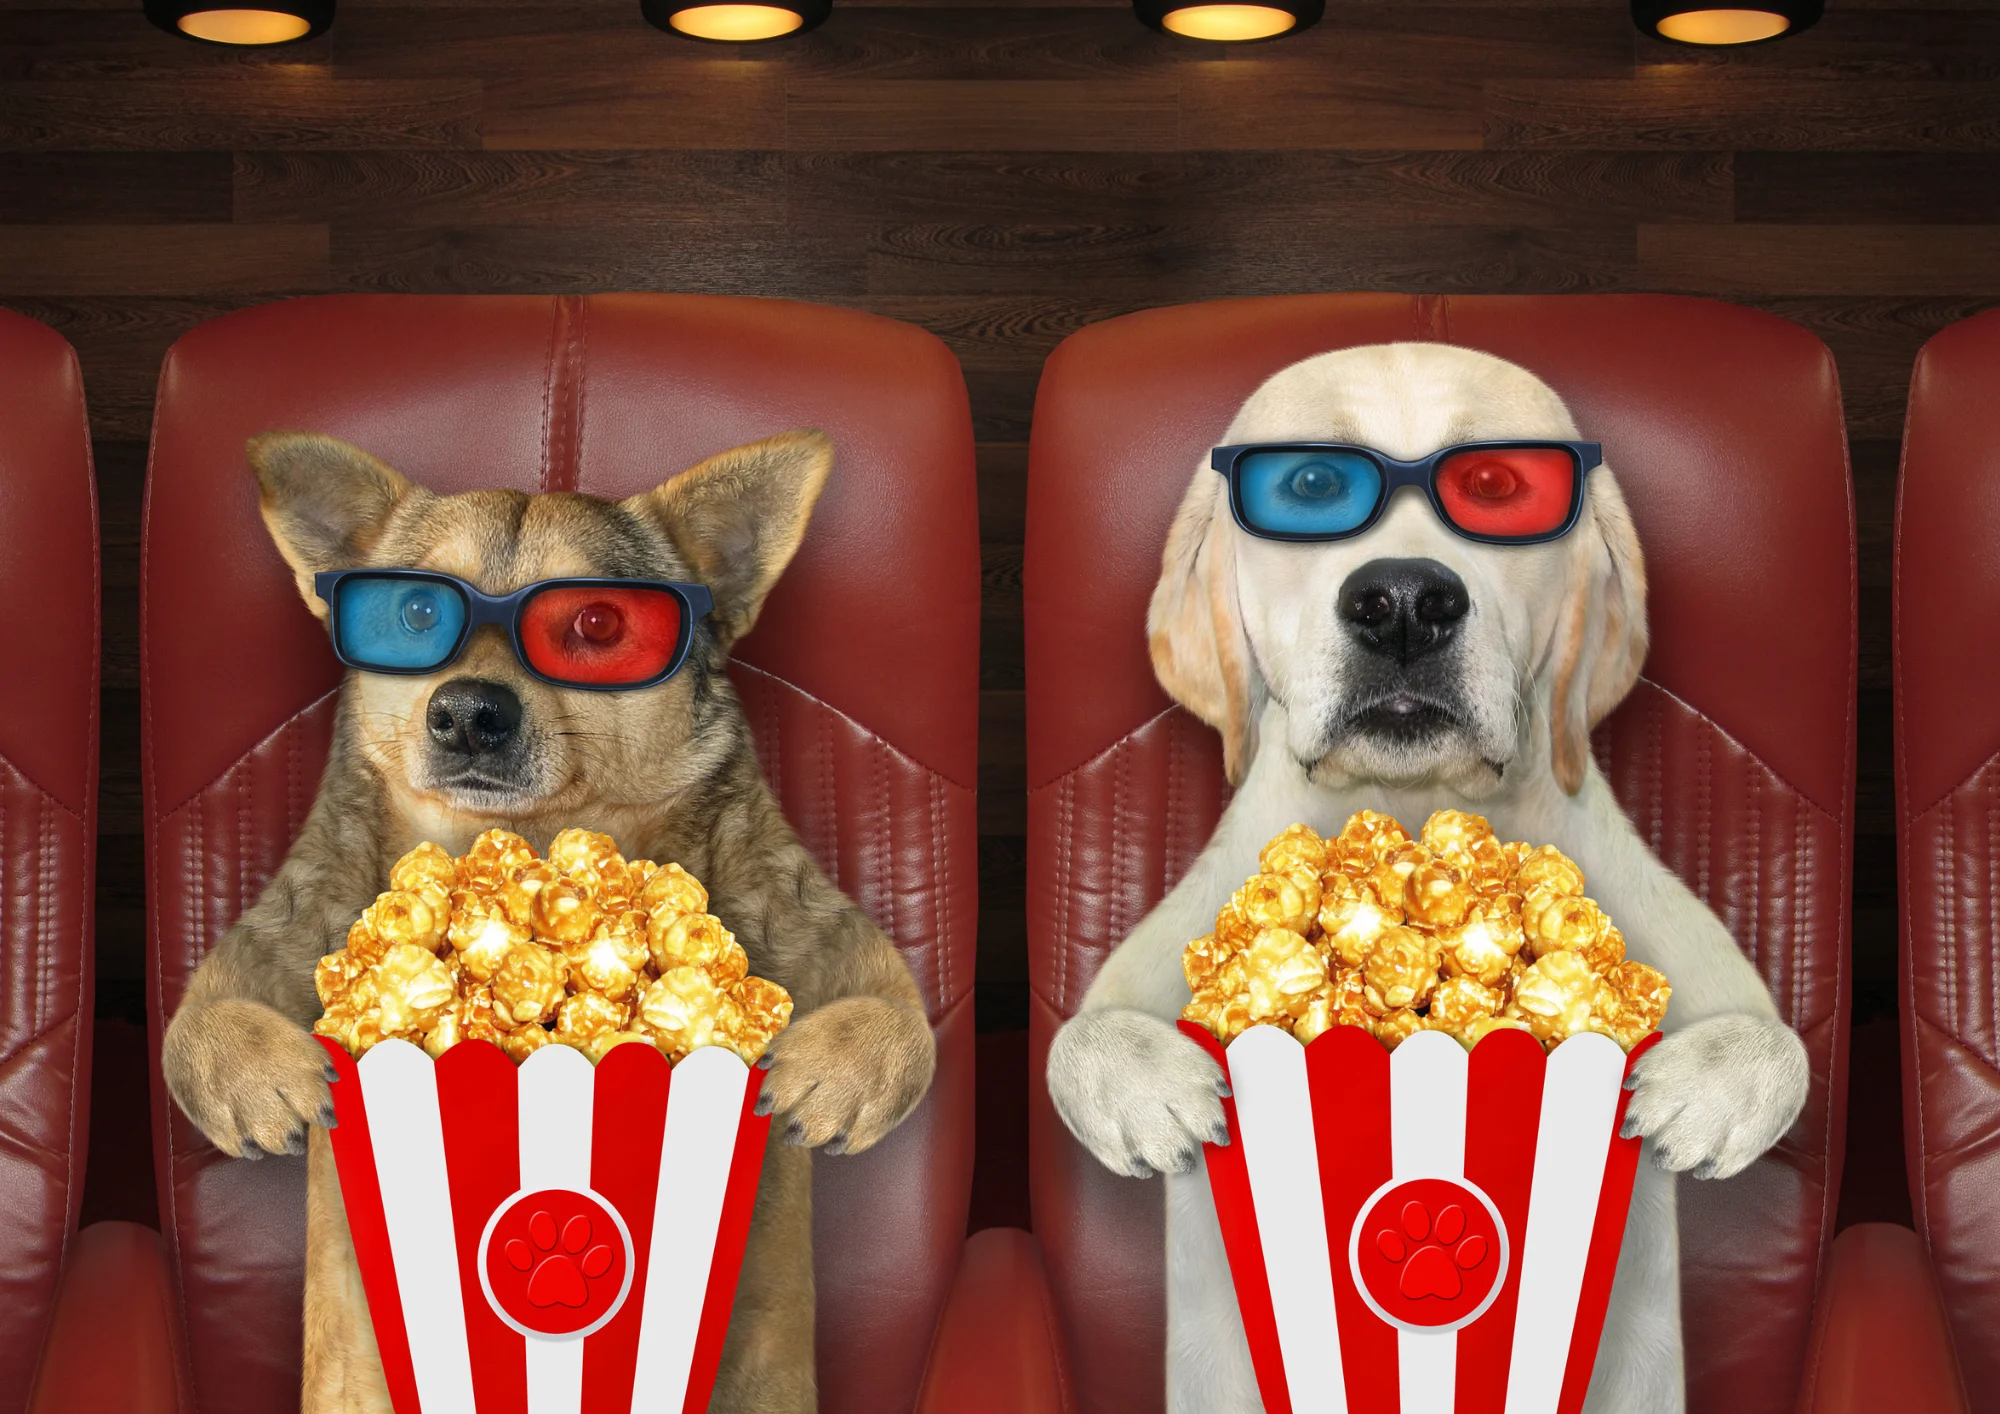 Top 10 Best Dog Movies Of All Time - Our Favourites fun ways